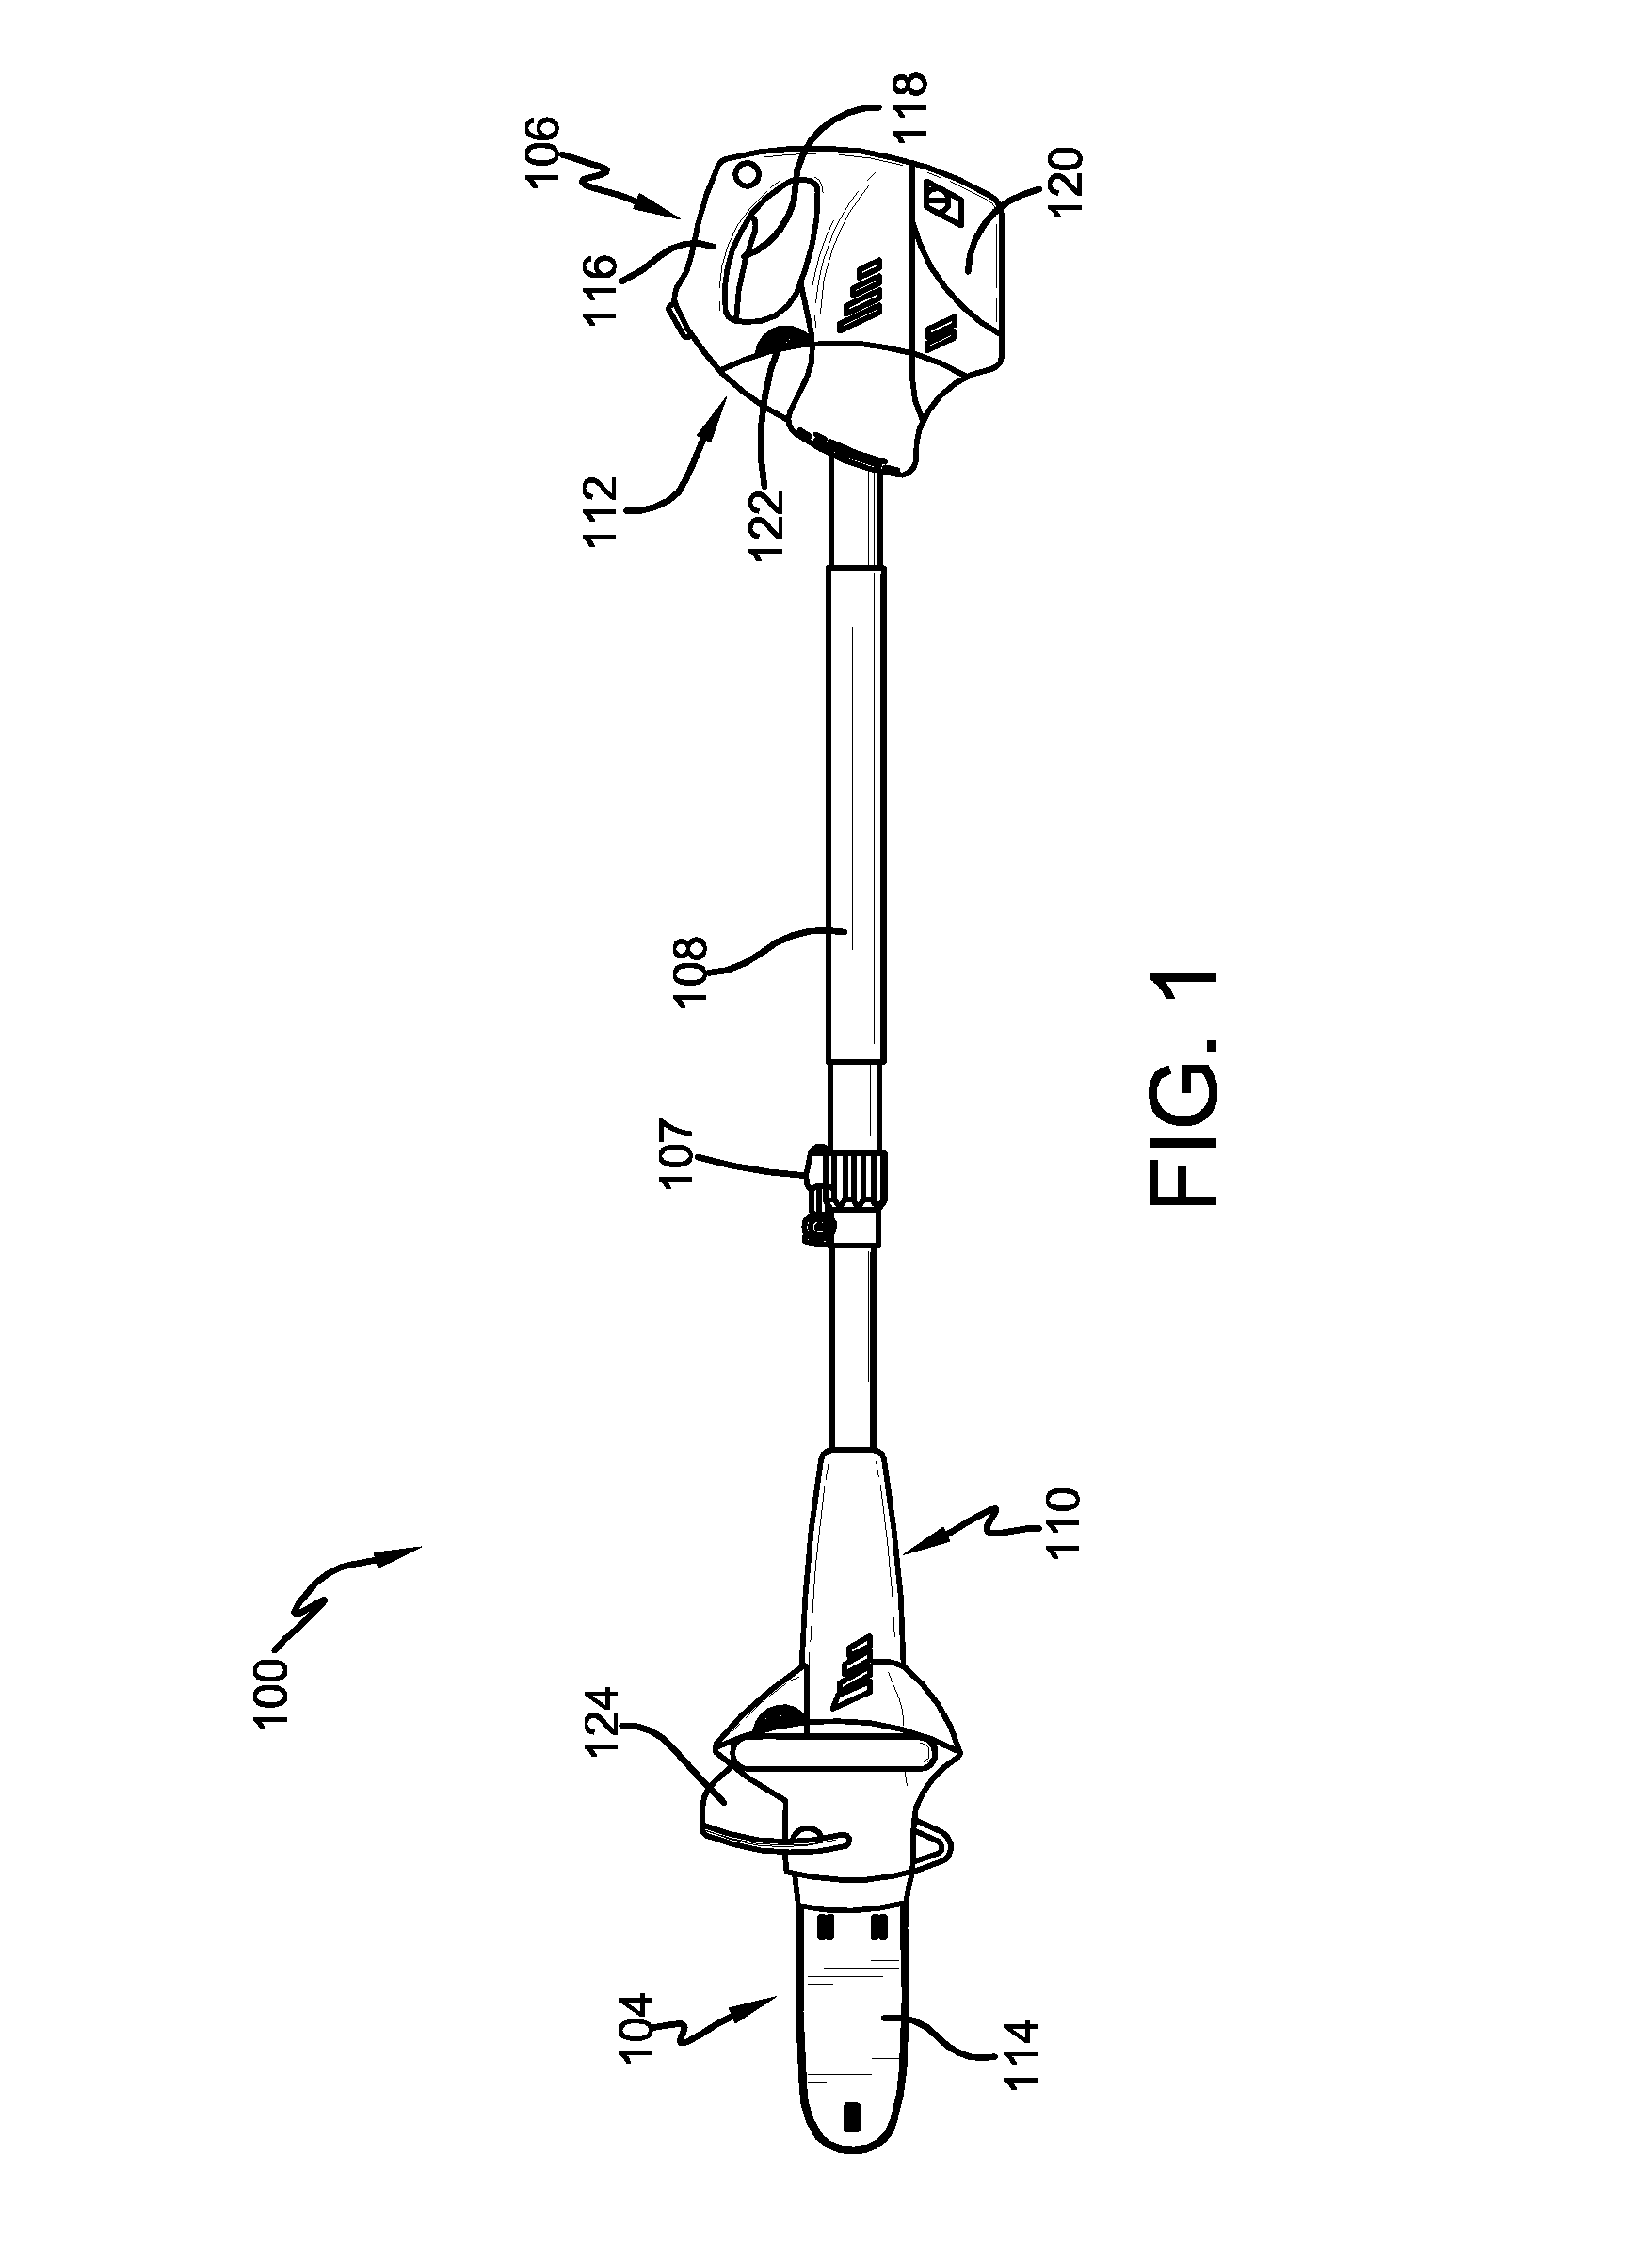 Split power tool with extension